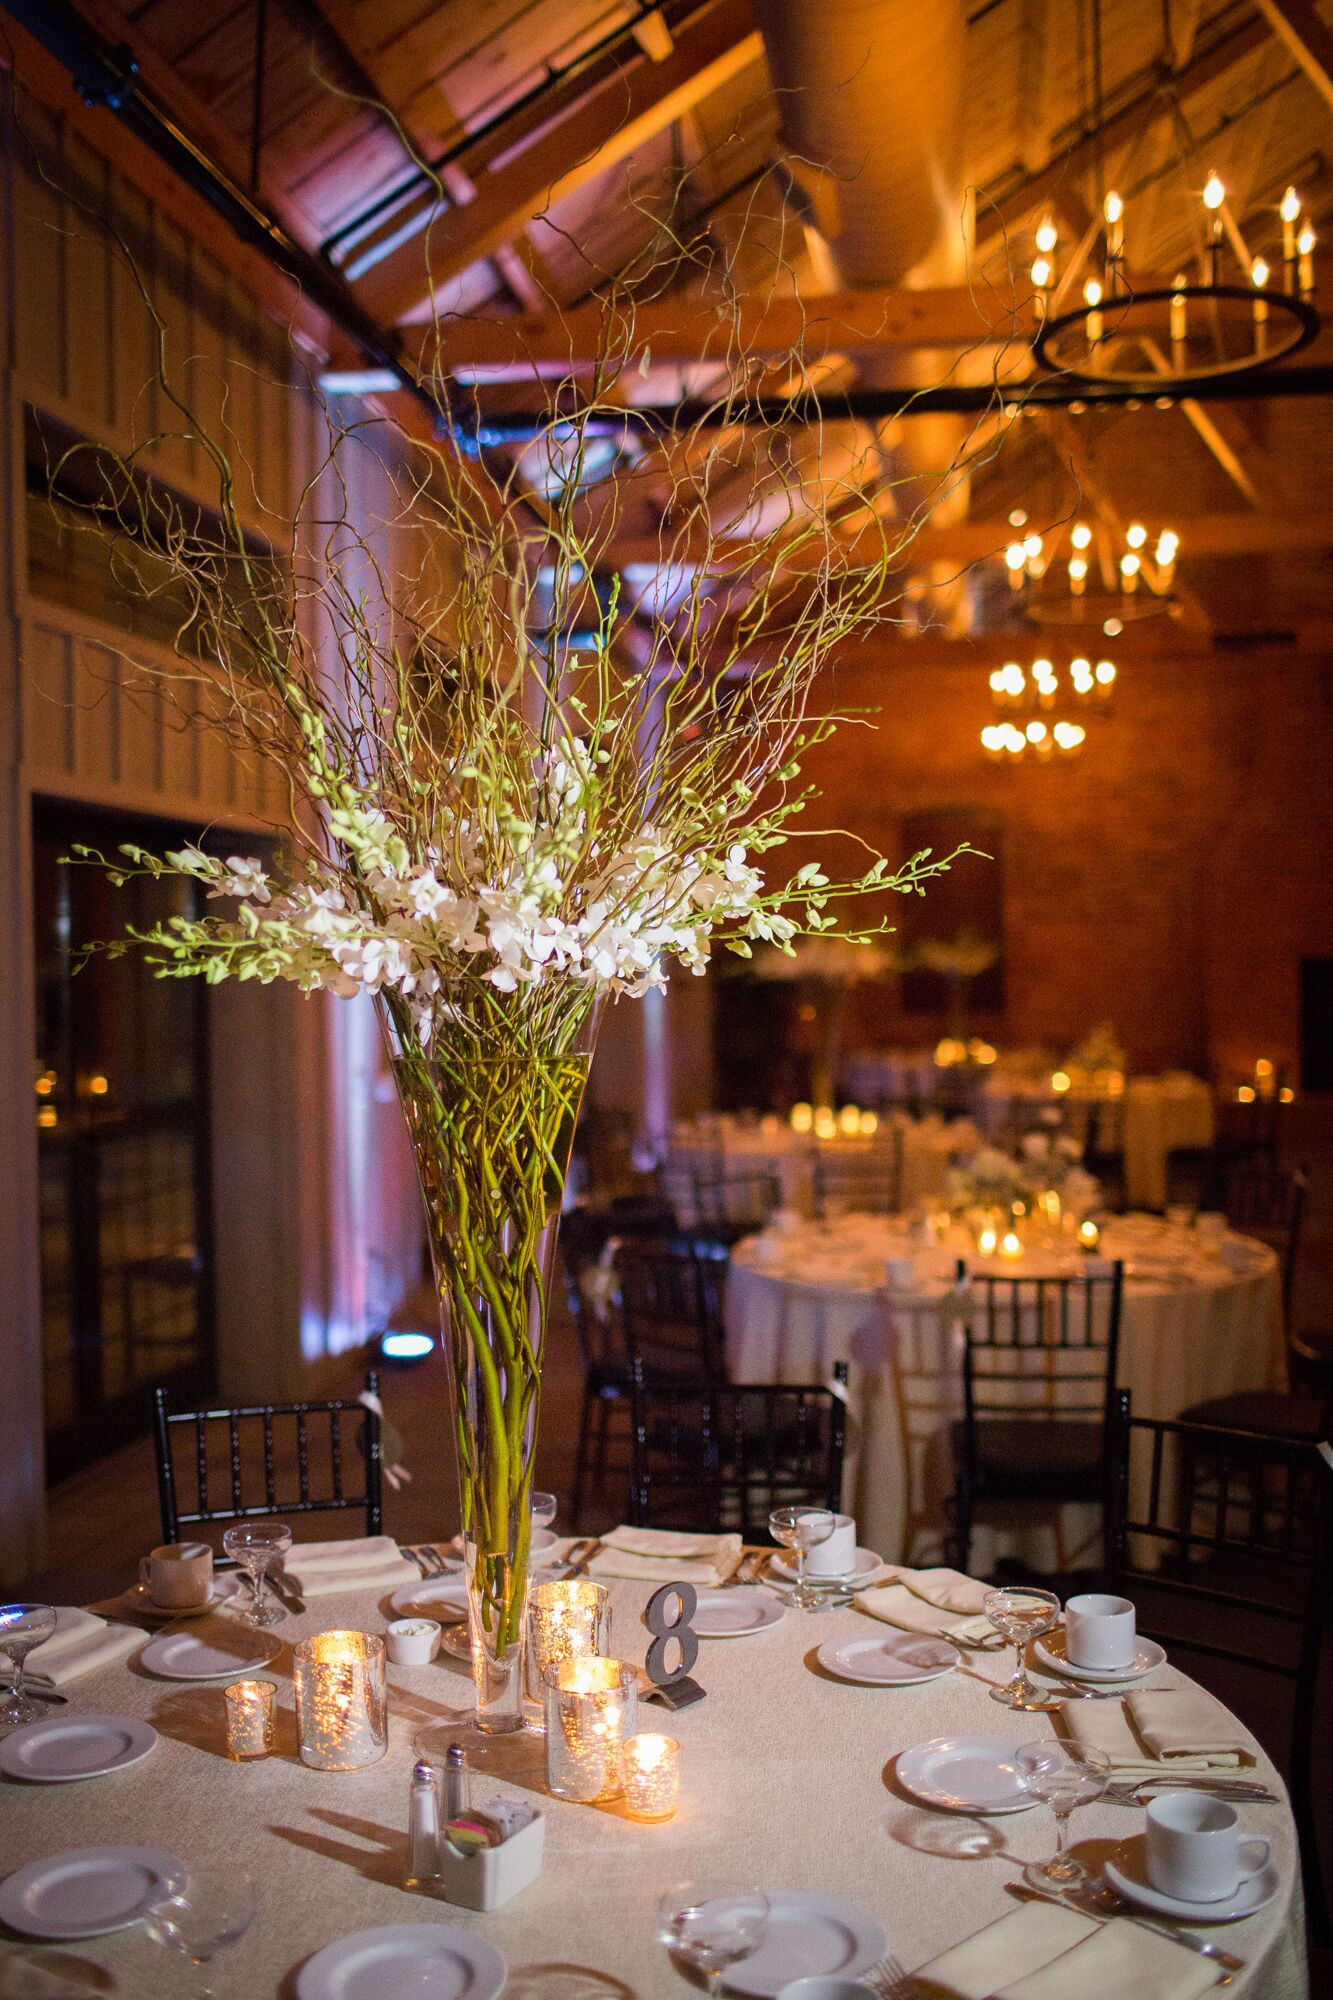 DIY Wedding Centerpieces With Branches
 Tall Orchid and Willow Branch Centerpieces and DIY Table